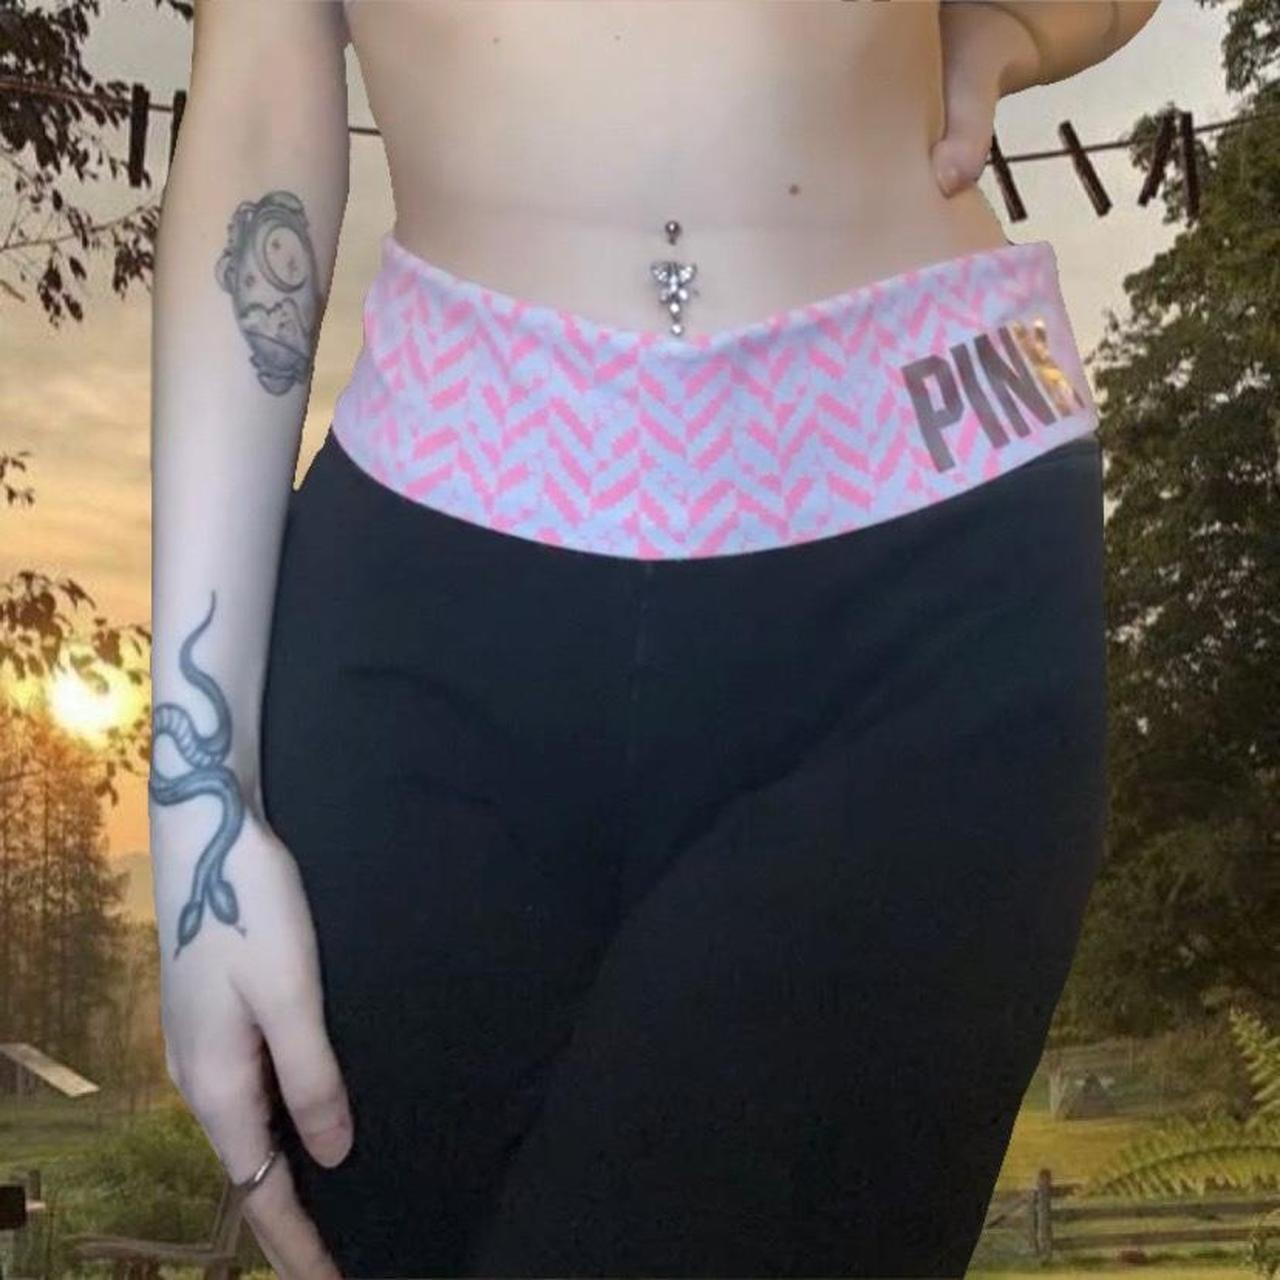 Log in  Pink outfits victoria secret, Pink yoga pants, Victoria